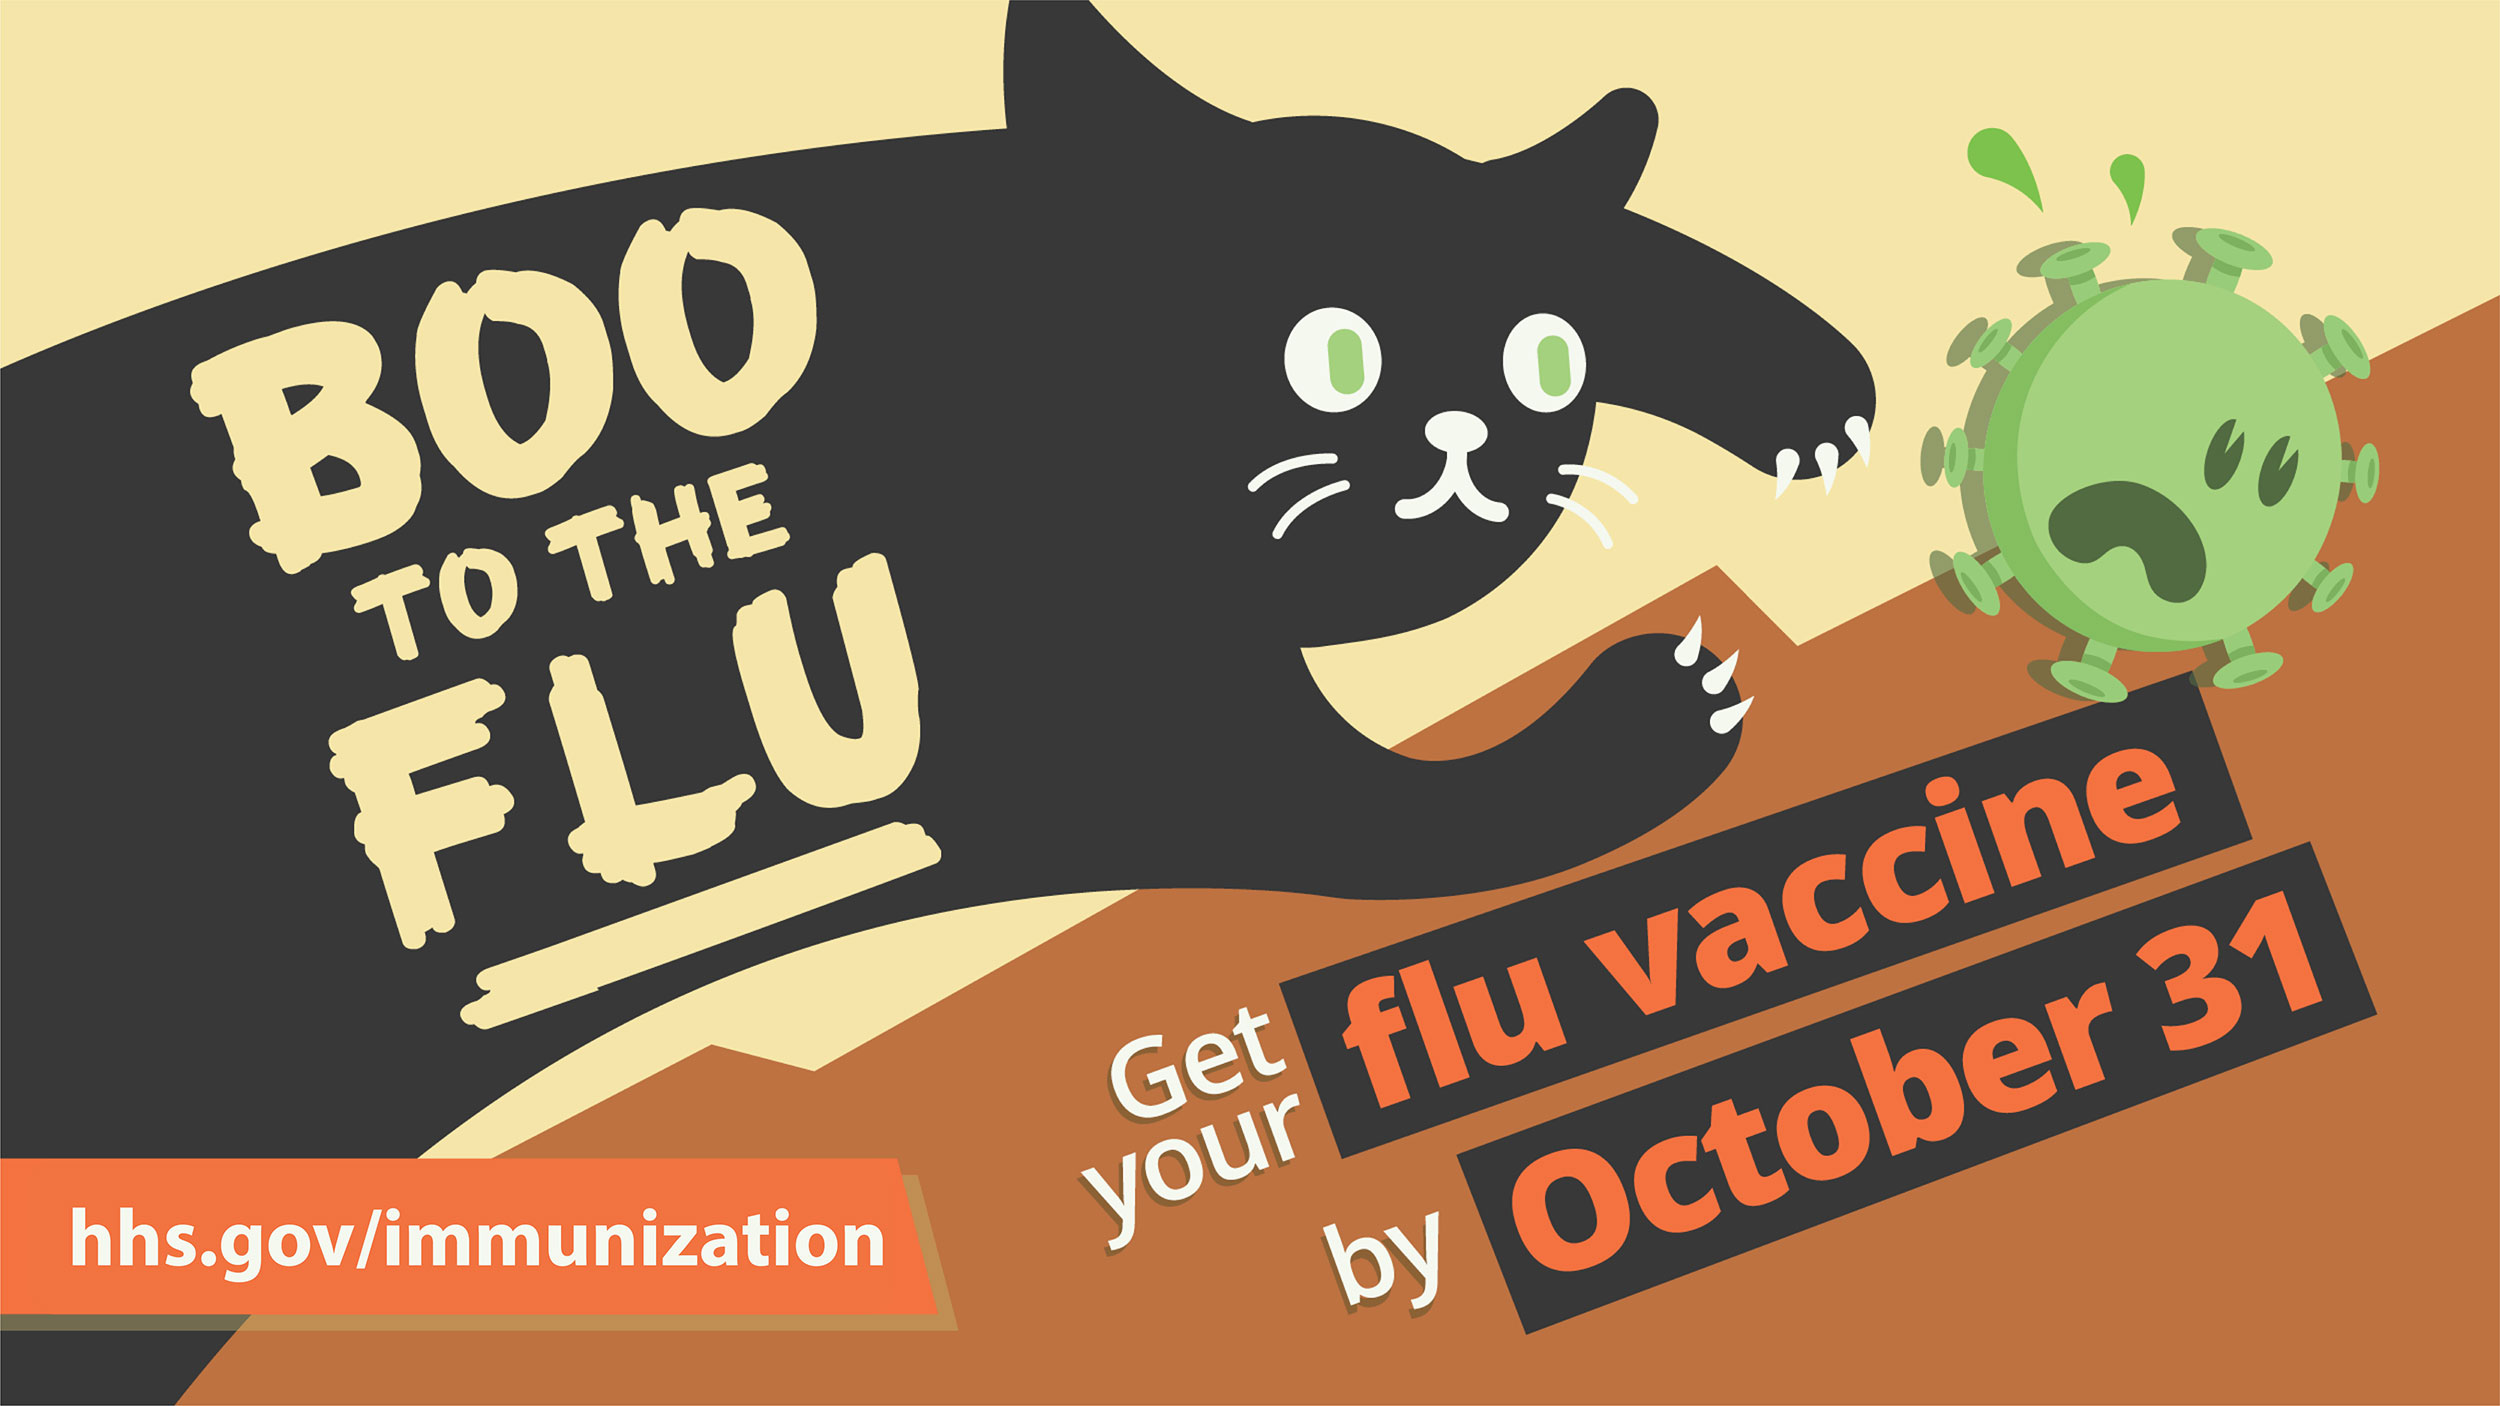 Text reads, "Boo to the flu. Get your flu vaccine by October 31." Image of a black cartoon cat chasing a cartoon virus.